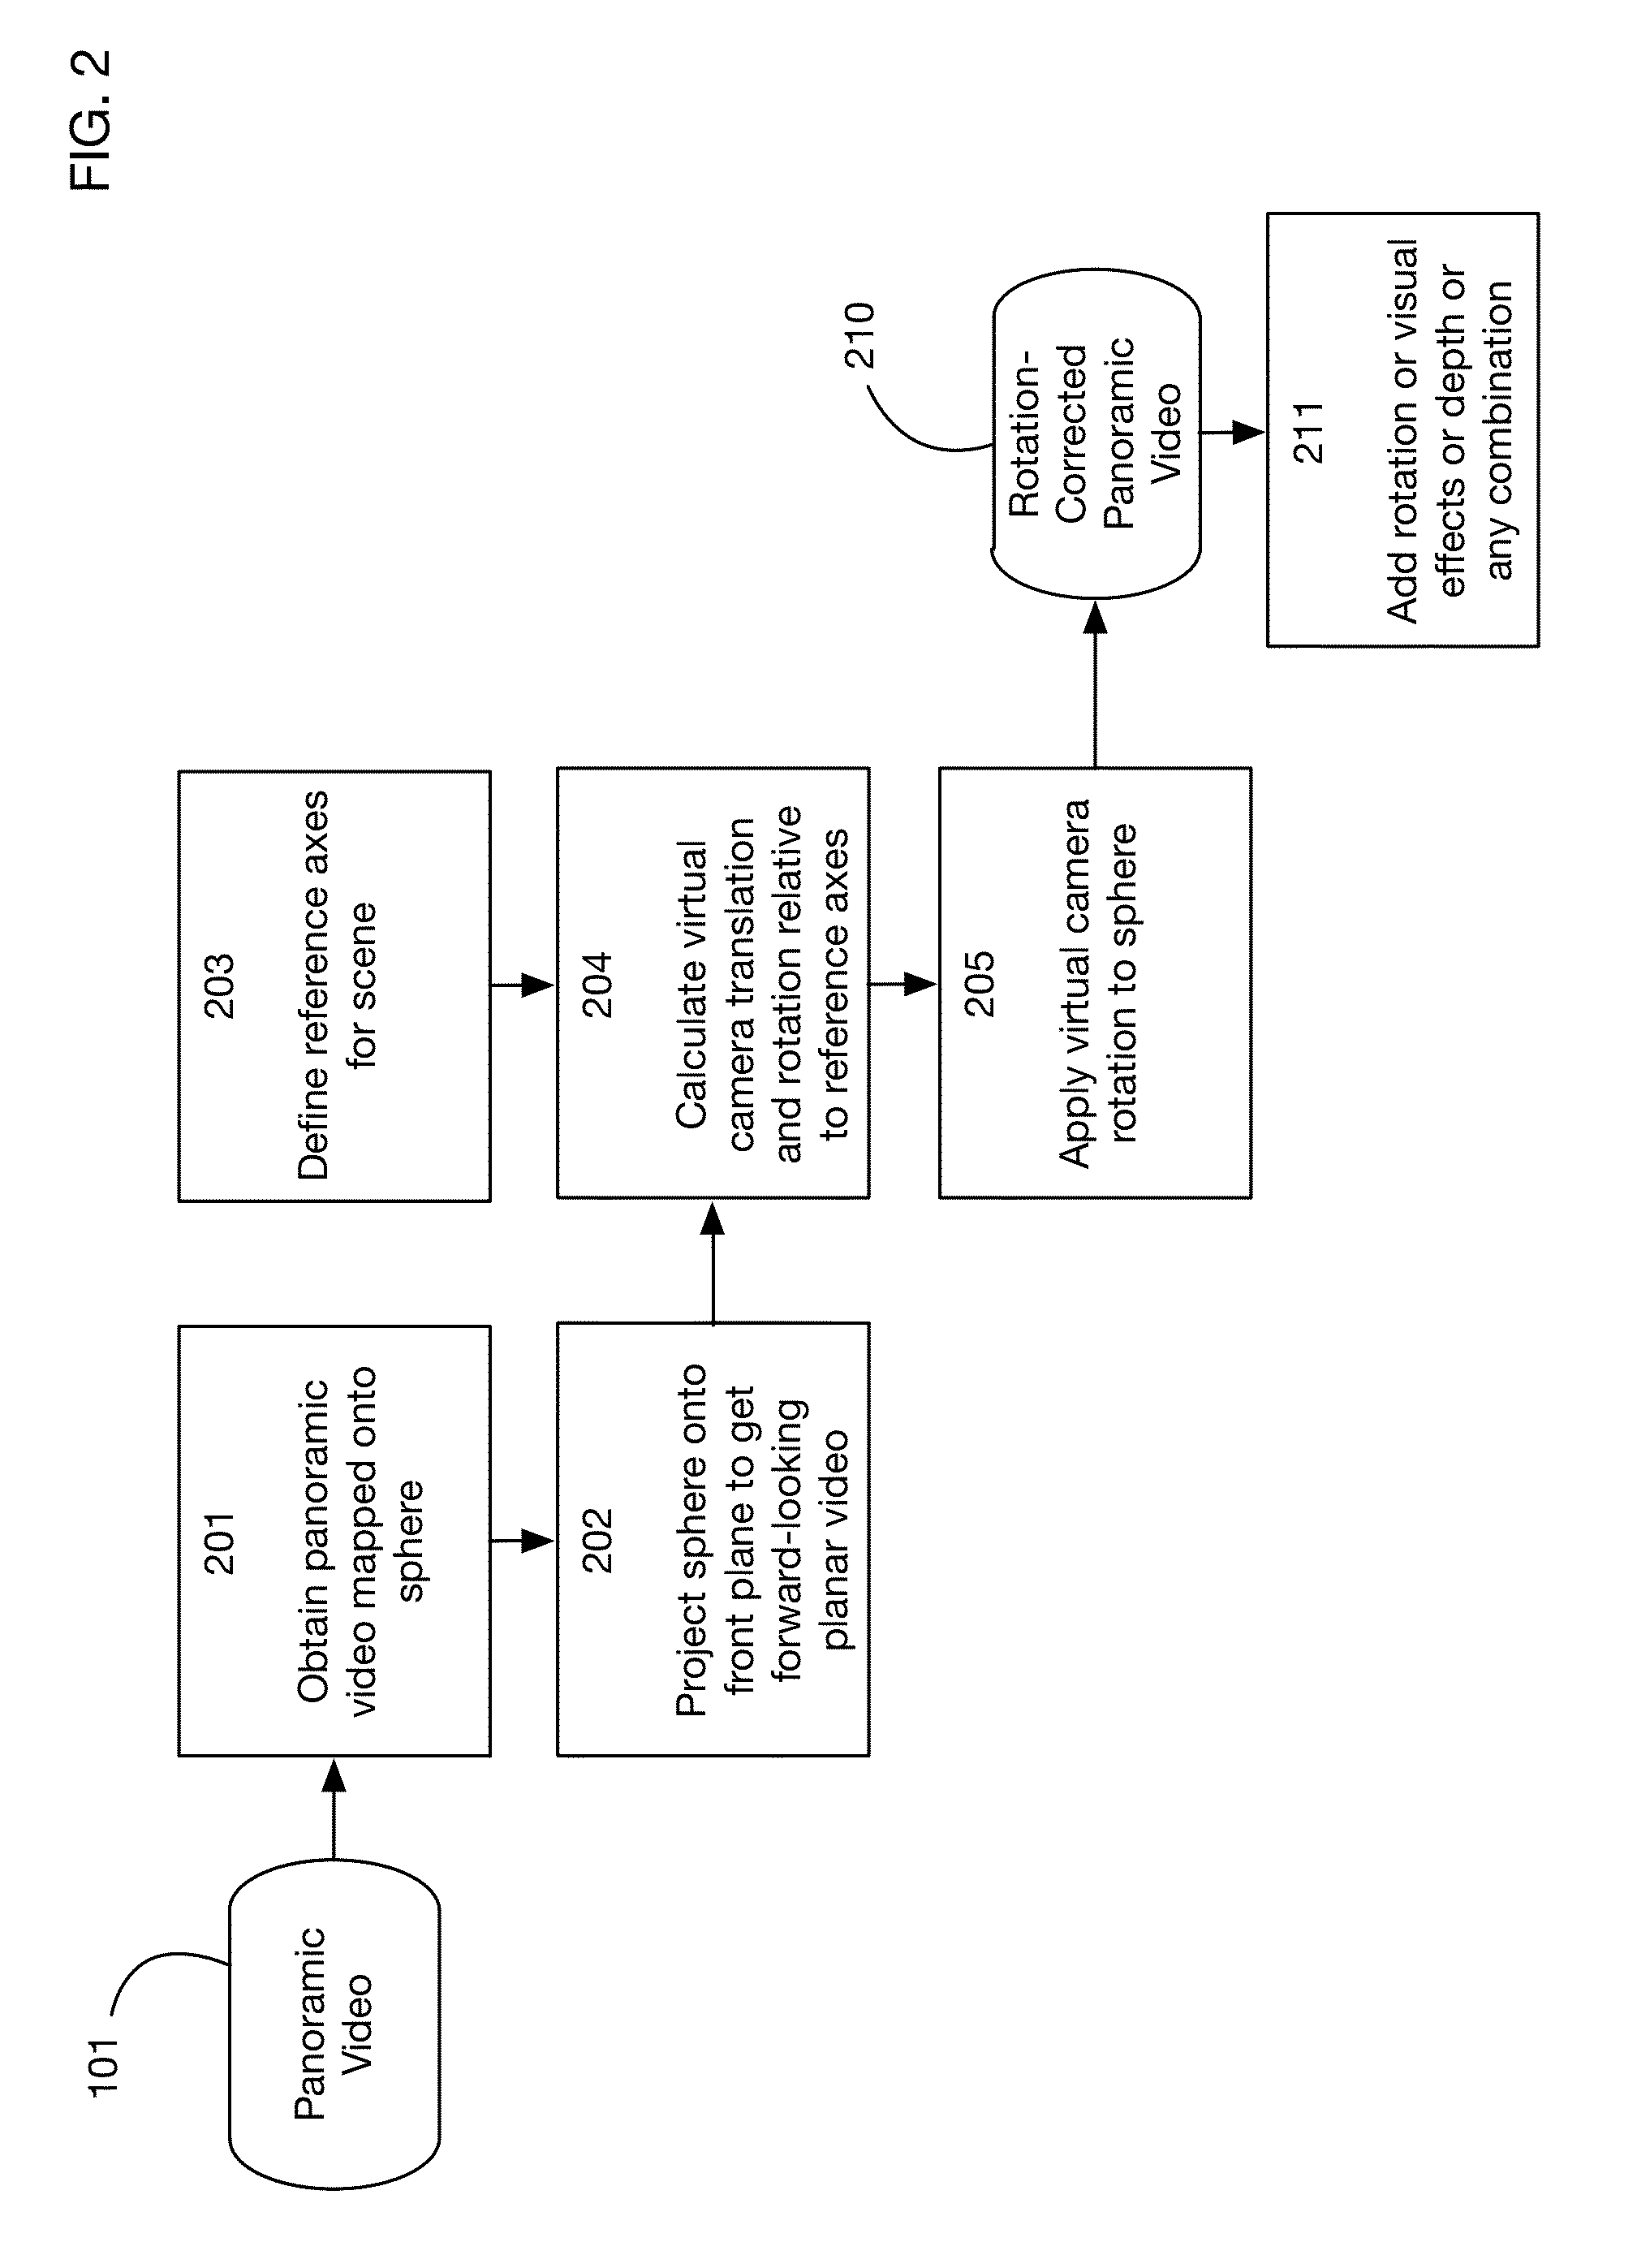 System and method for removing camera rotation from a panoramic video